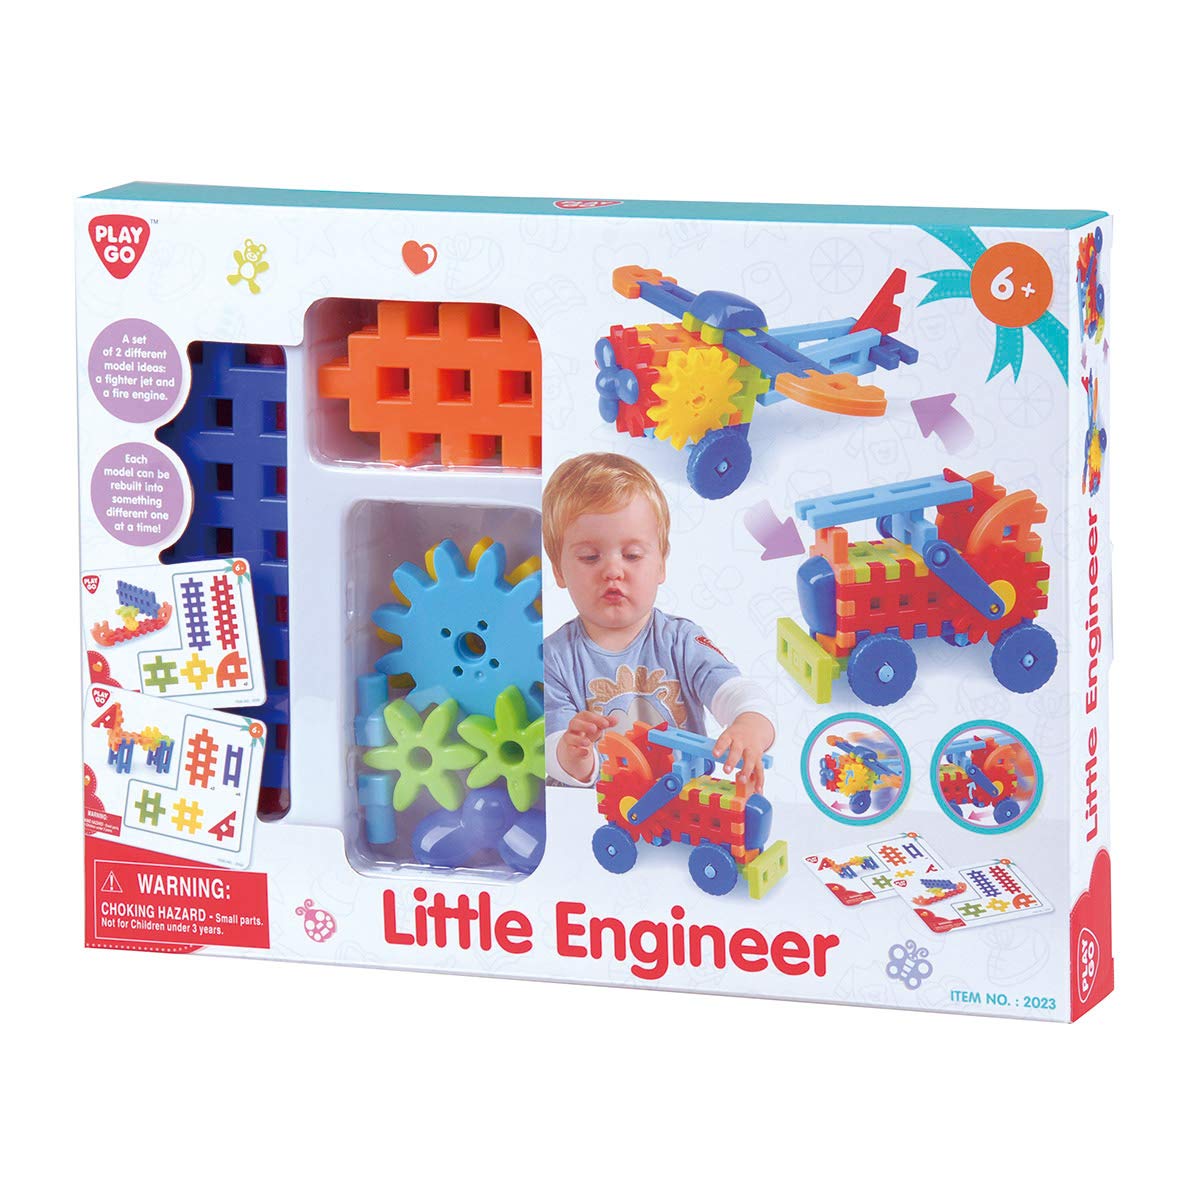 PLAY Educational Construction Engineering Building Learning Set - Creative Games & Fun Activity - 2 Different Models - Puzzles STEM Toys - Fighter Jet & Fire Engine (2023)